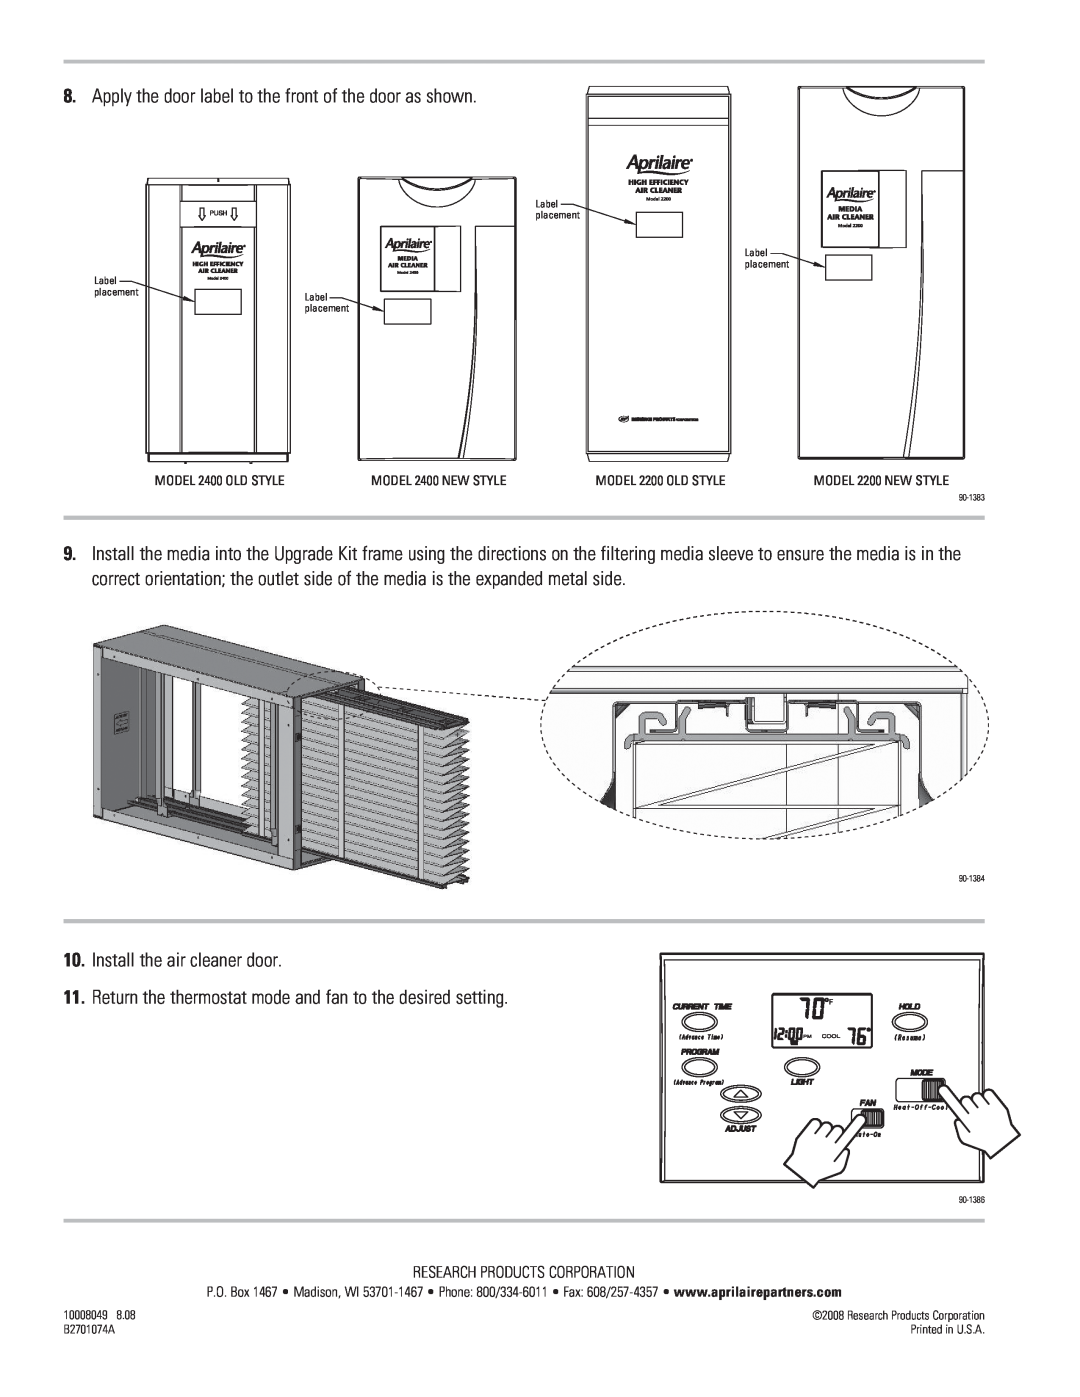 Aprilaire 1413, 1213 installation instructions Install the air cleaner door 